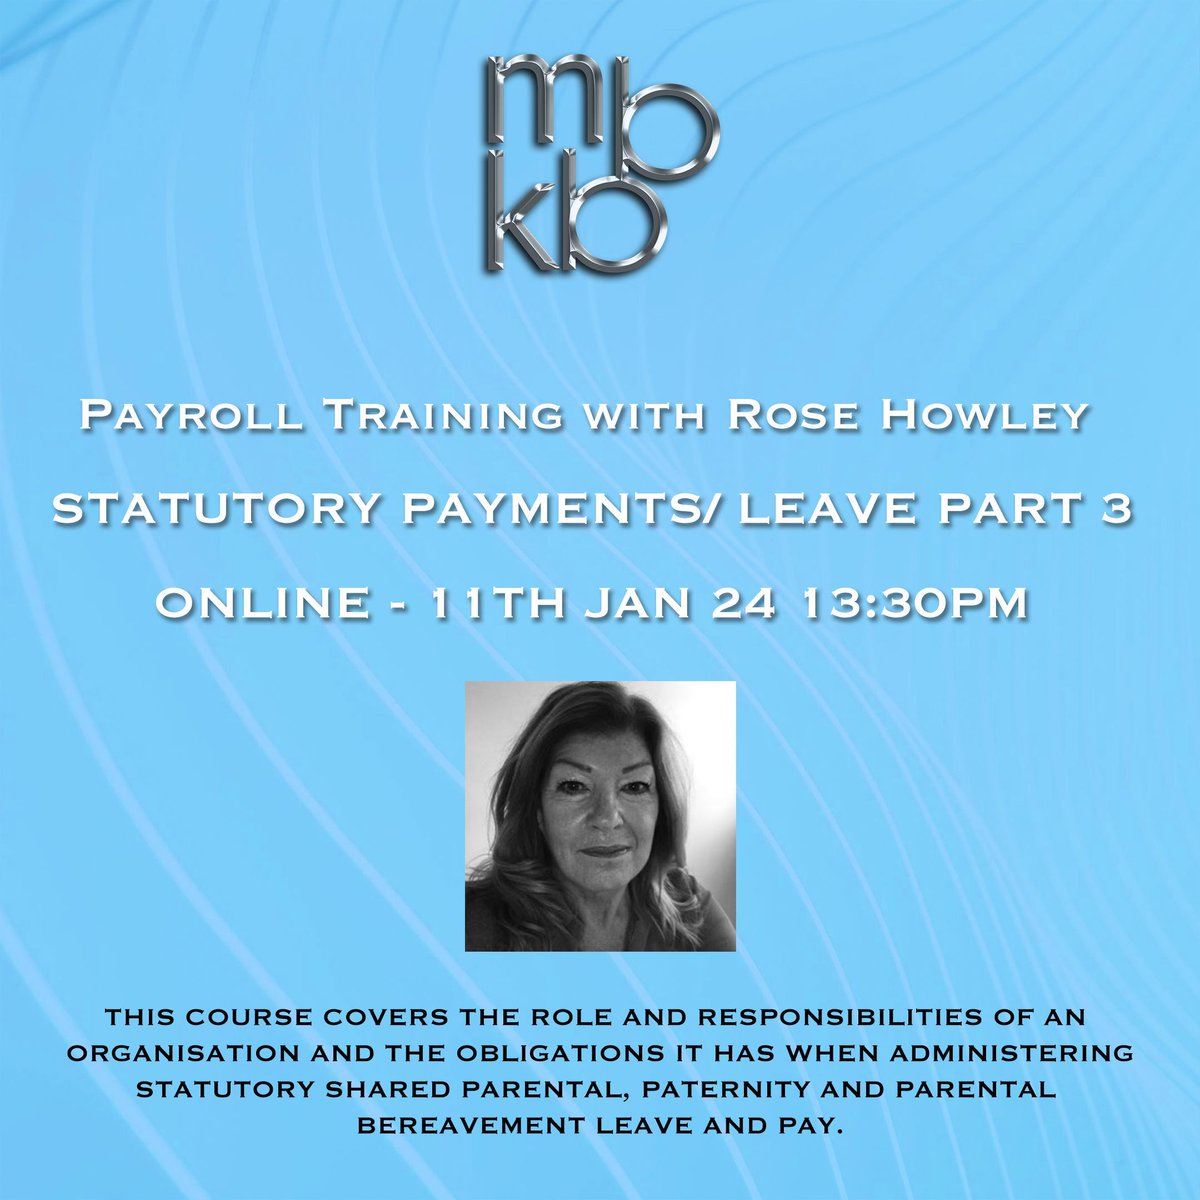 We have another fantastic #OnlinePayrollTrainingSessions coming up in January!

Sign up here - buff.ly/47DAQO8
This session is for anyone who would like to join in, places are £75 each.

#MBKB #MBKBTraining #OfstedOutstandingTrainingProvider #StatutoryPayments #Payroll